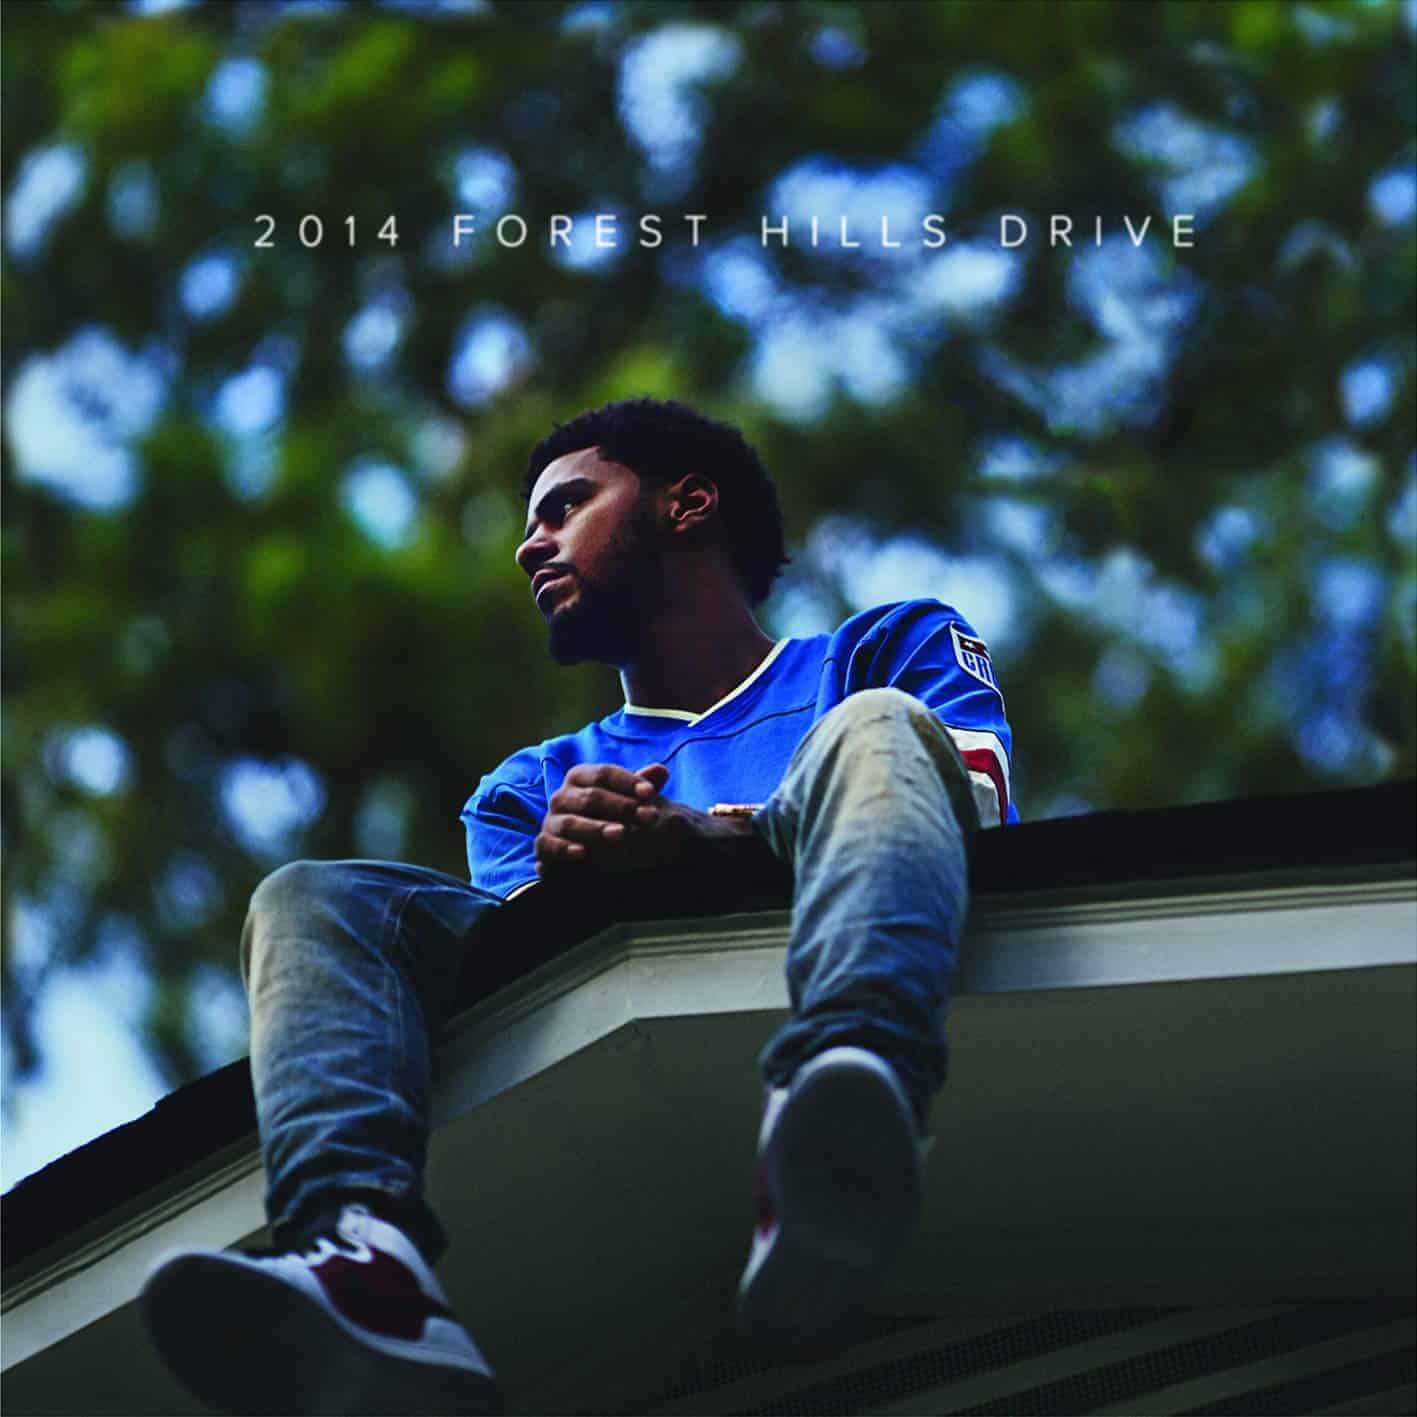 J. COLE - 2014 FOREST HILLS DRIVE